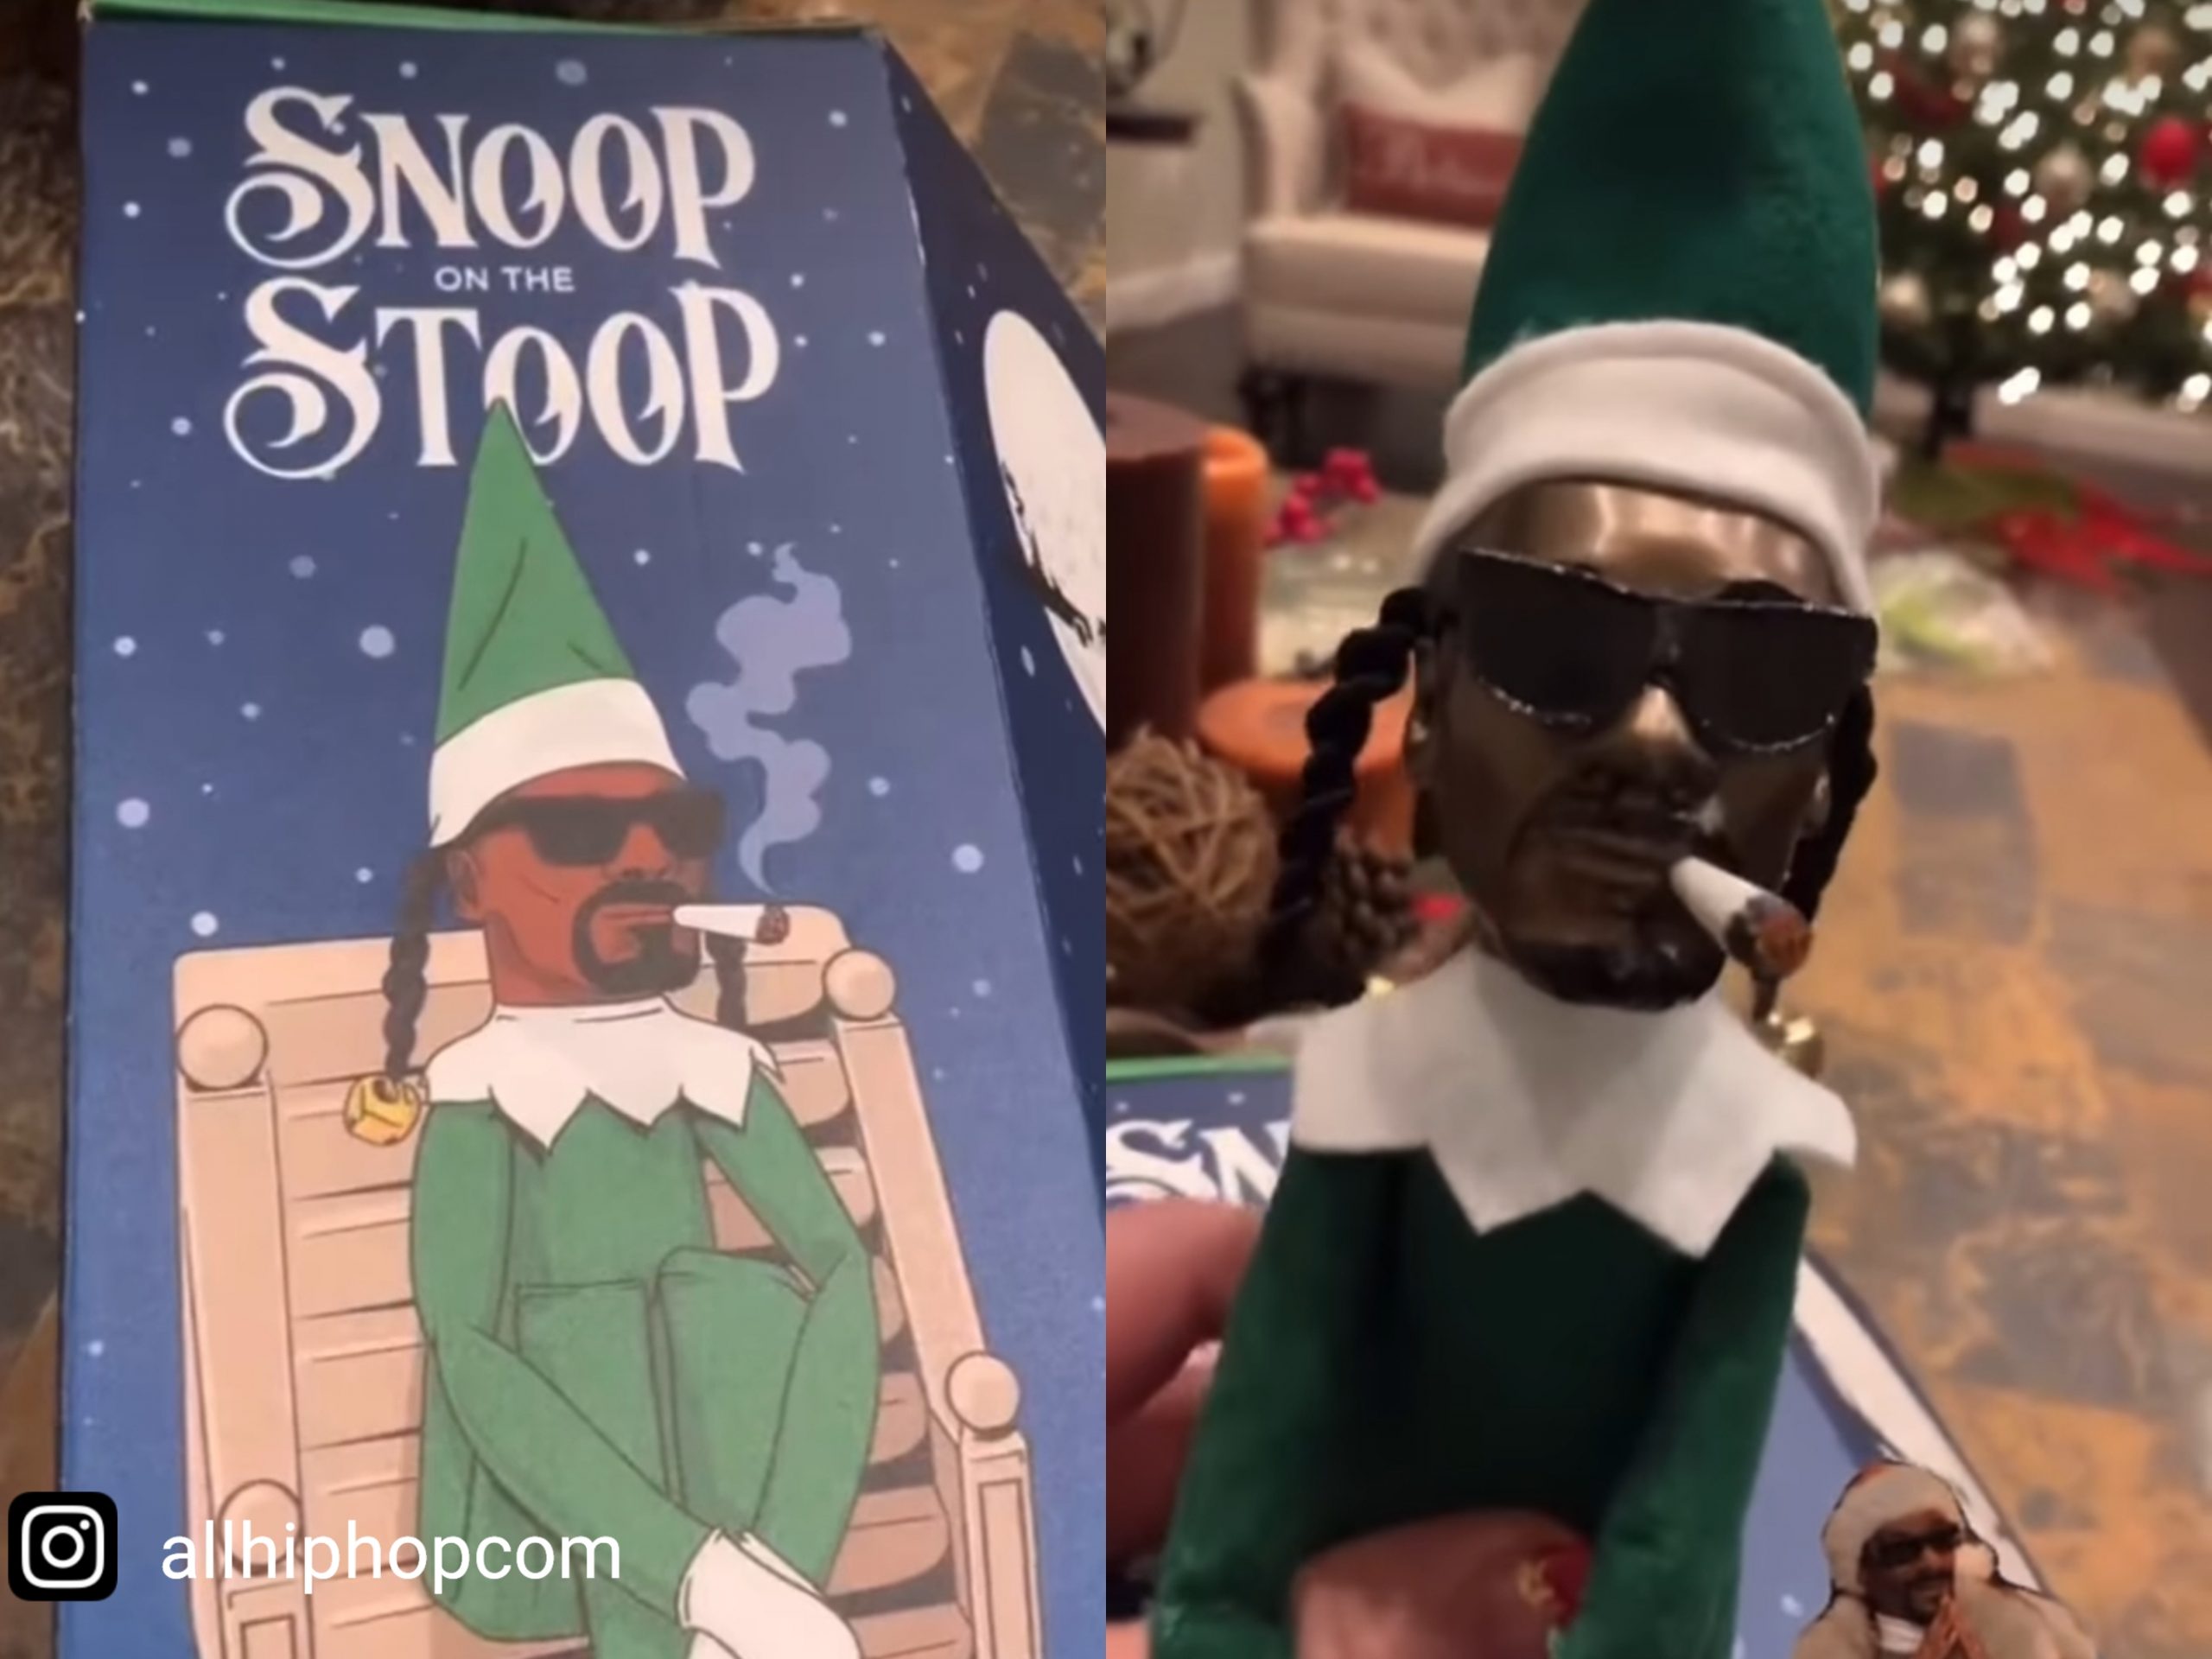 Snoop Dogg Taking Legal Action Against ‘Snoop On The Stoop’ Creator